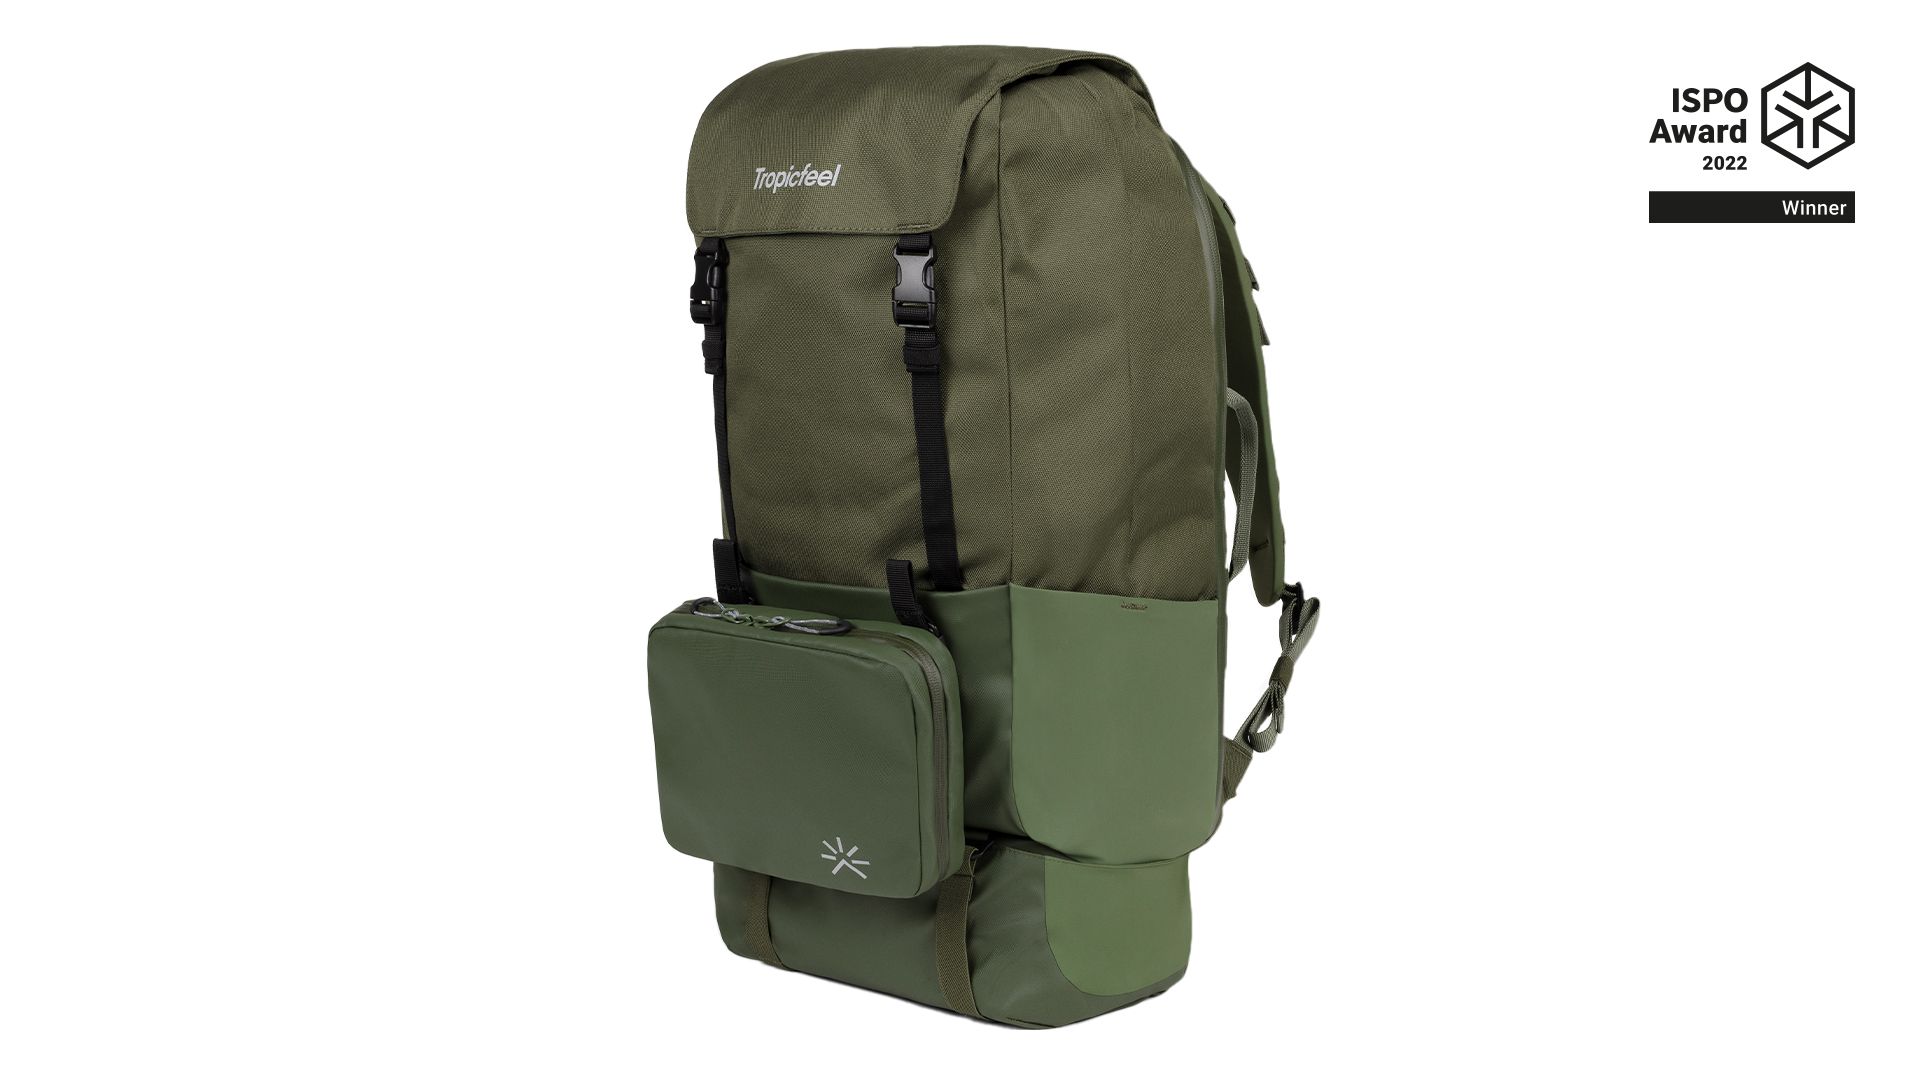 Practical, lightweight, and innovative - the Tropicfeel Shell Backpack